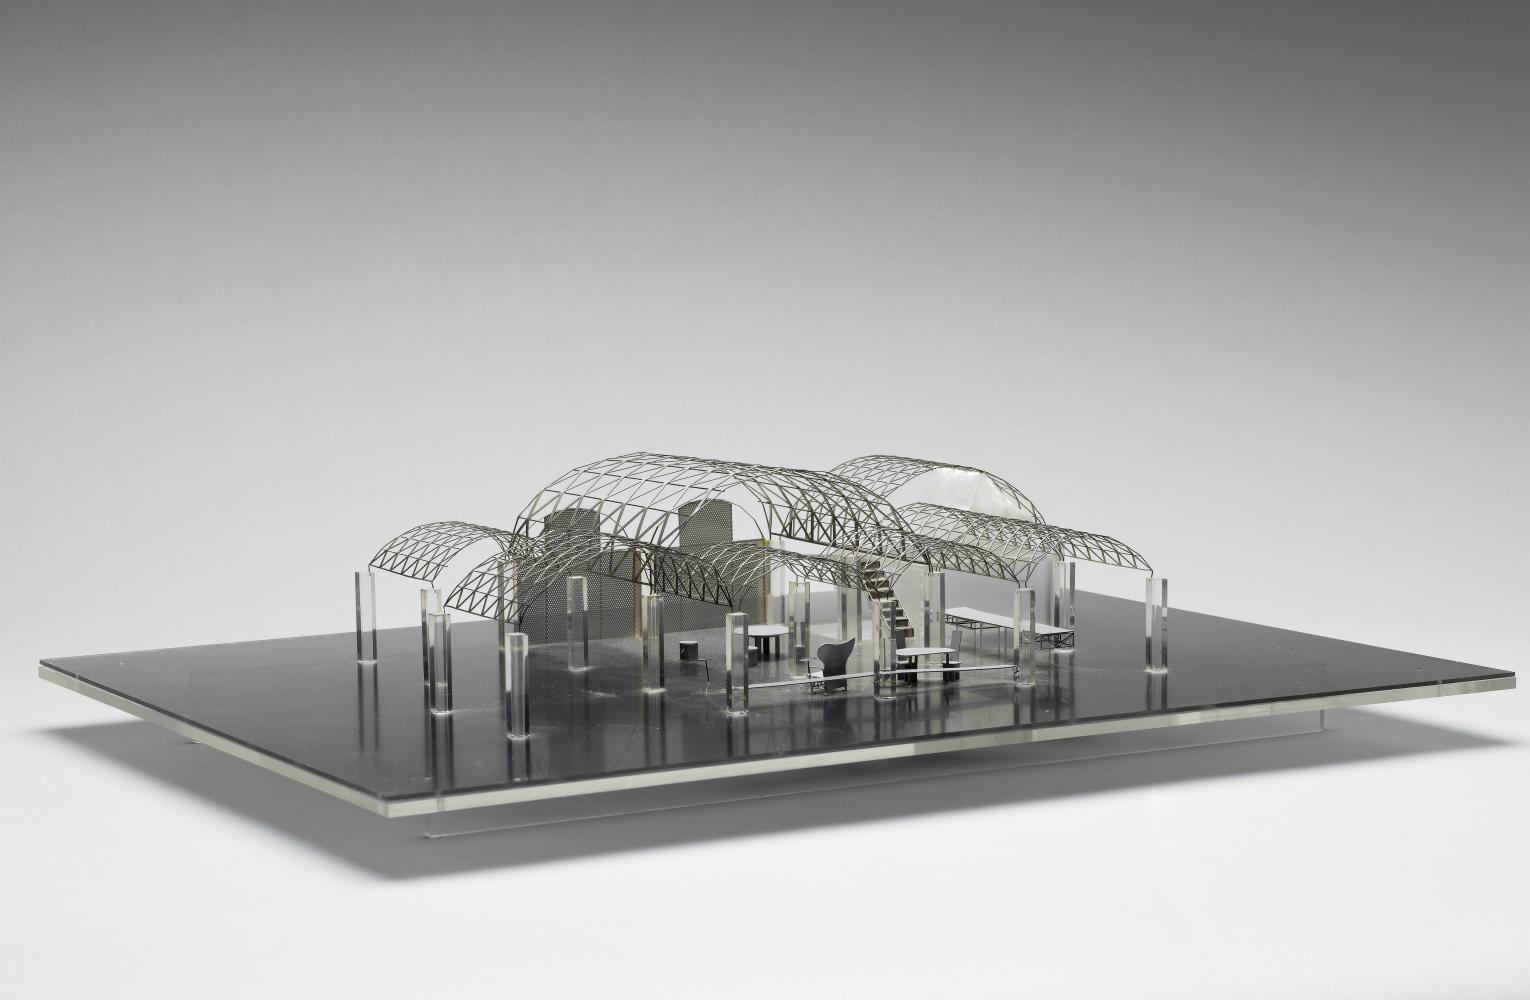 Toyo Ito "Silver Hut", 1982 - 1984, maßstabgetreues Modell